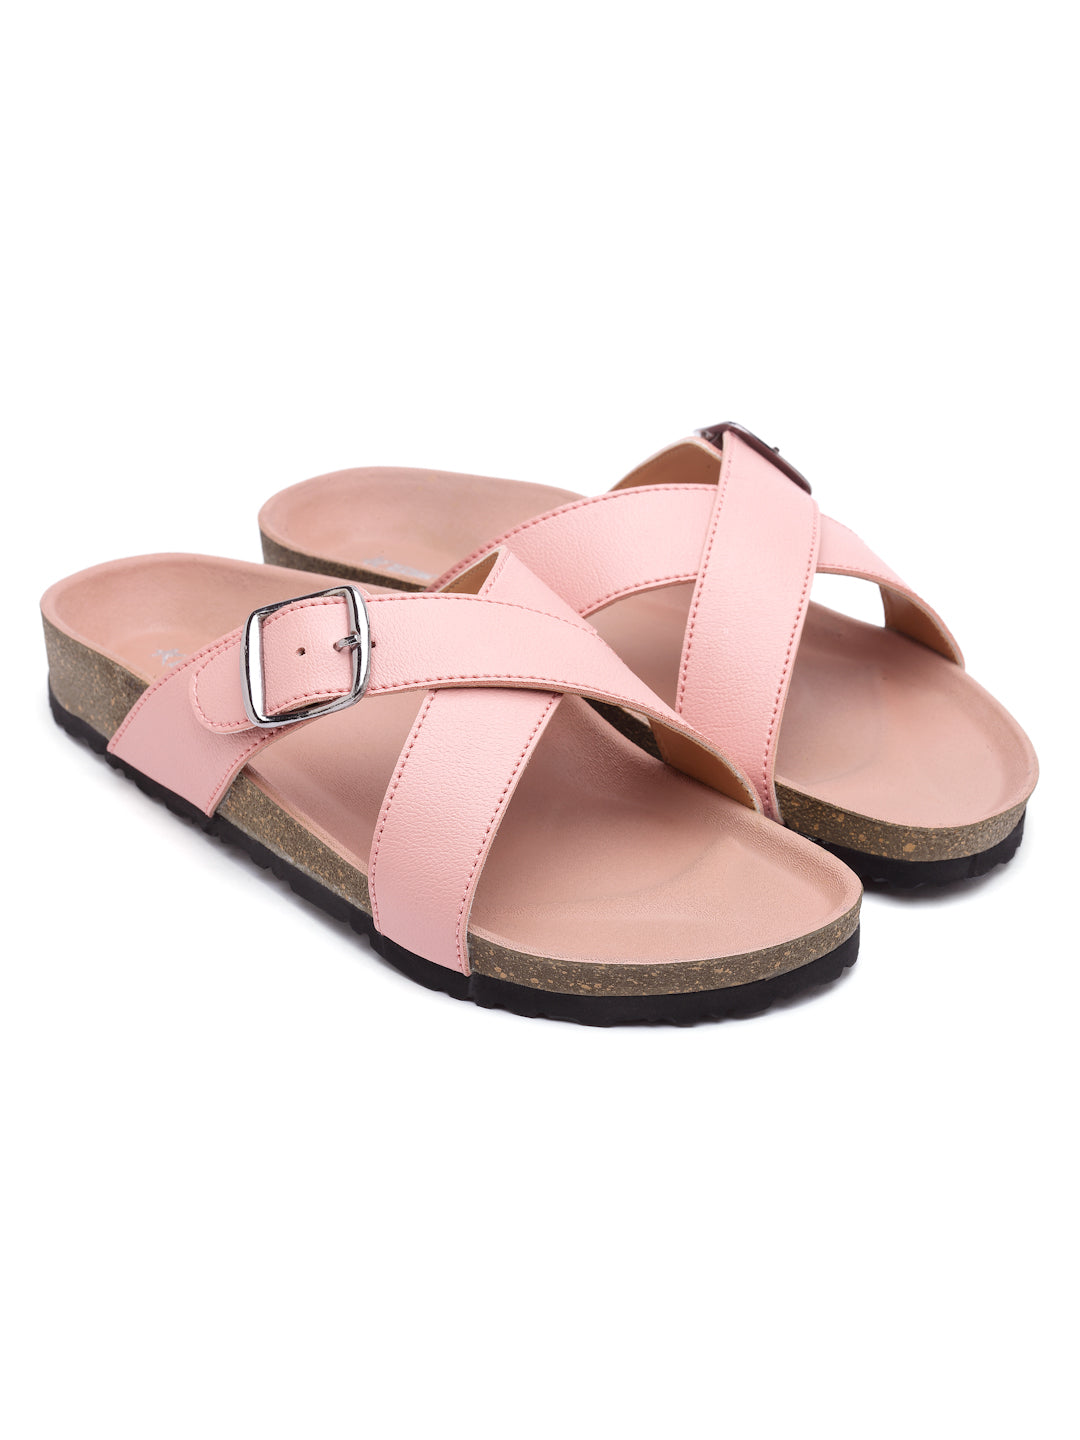 Women's Stylish Pink Synthetic Leather Casual Sandal